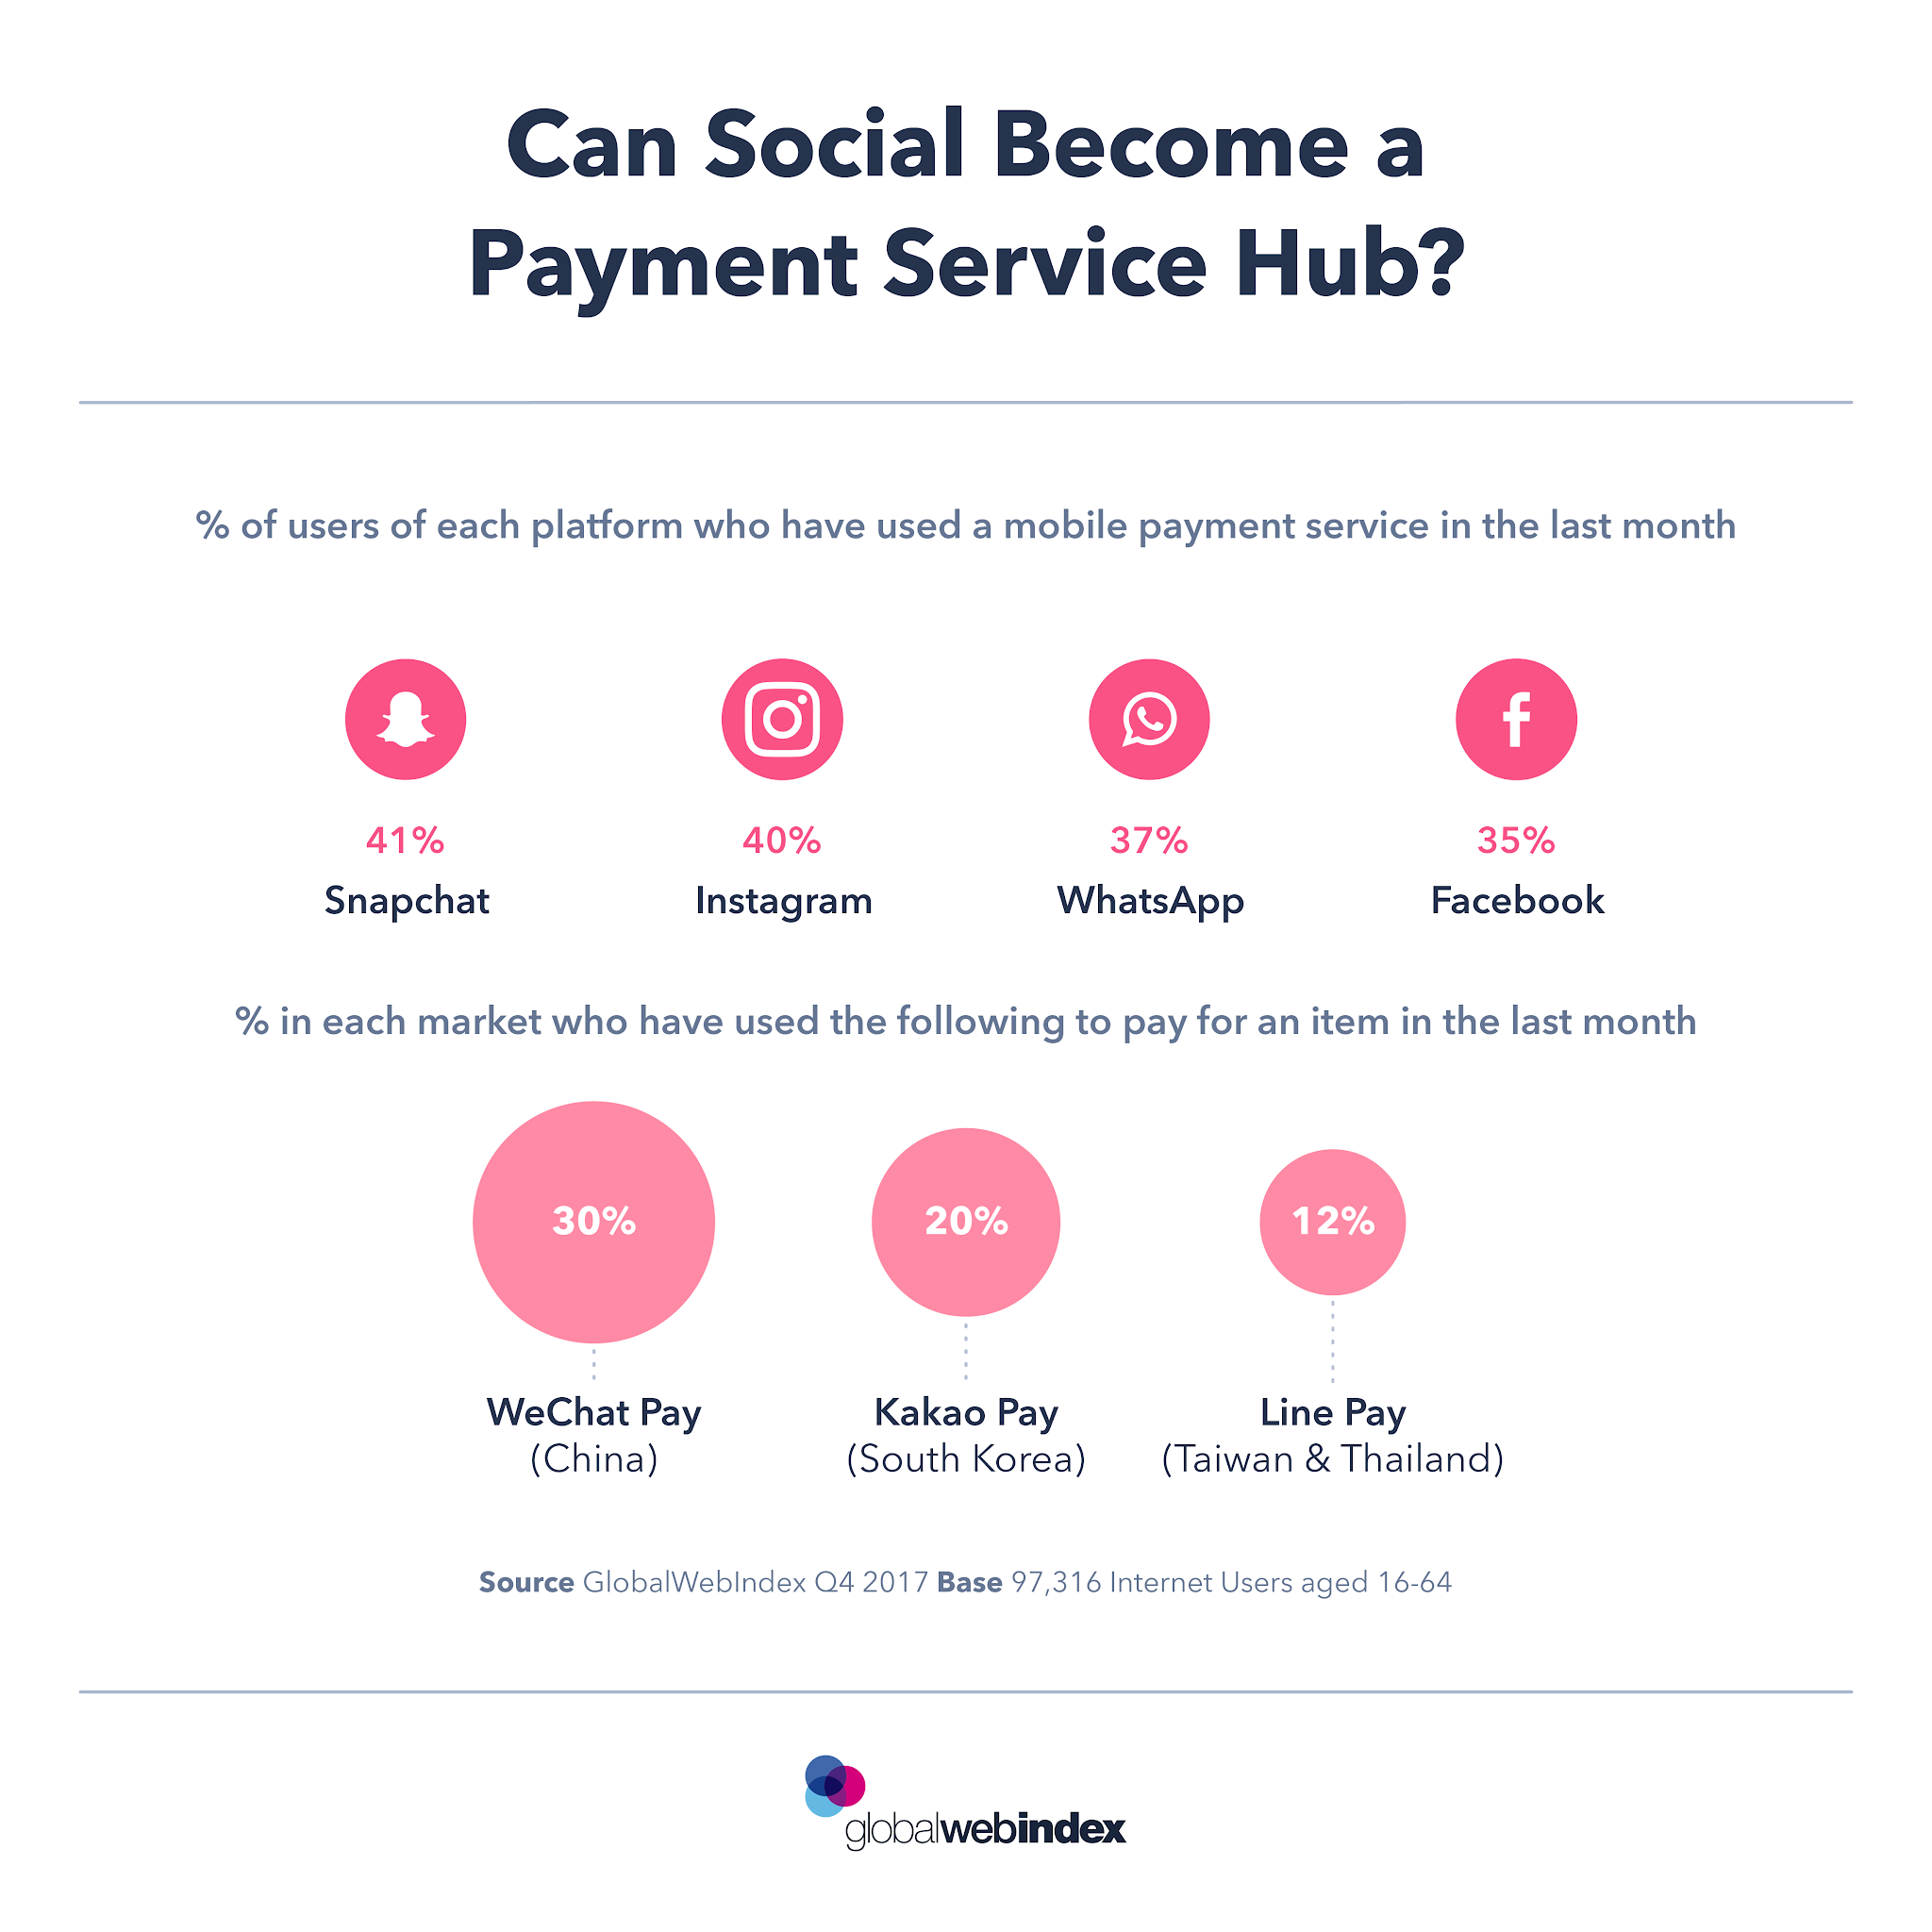 Can Social Media Become a Payment Service Hub? - #infographic